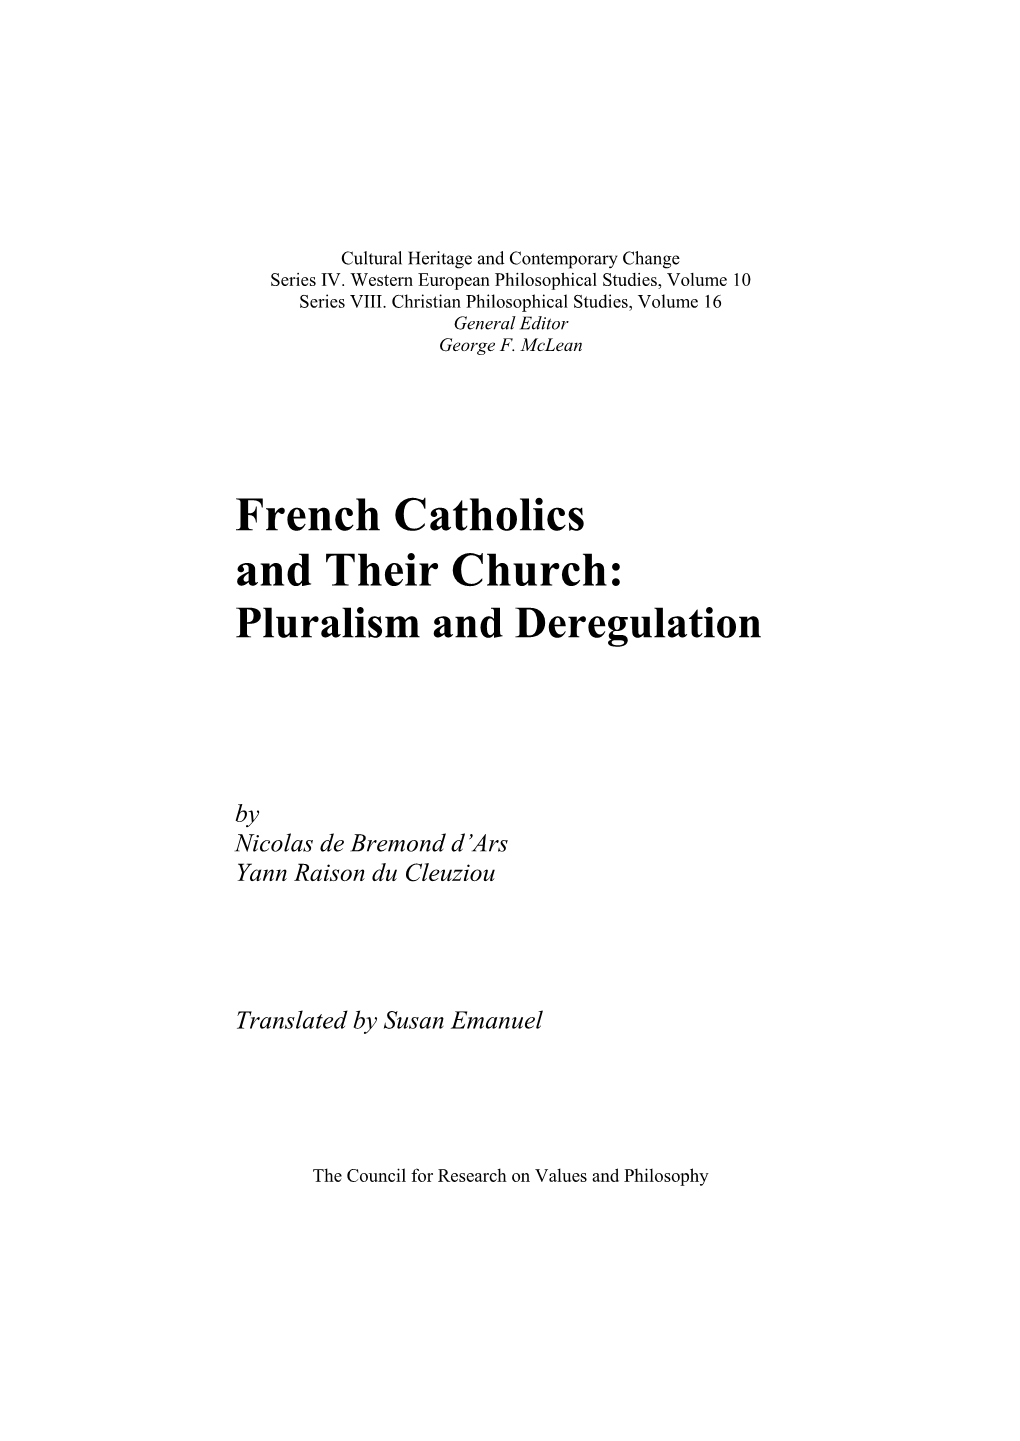 French Catholics and Their Church: Pluralism and Deregulation